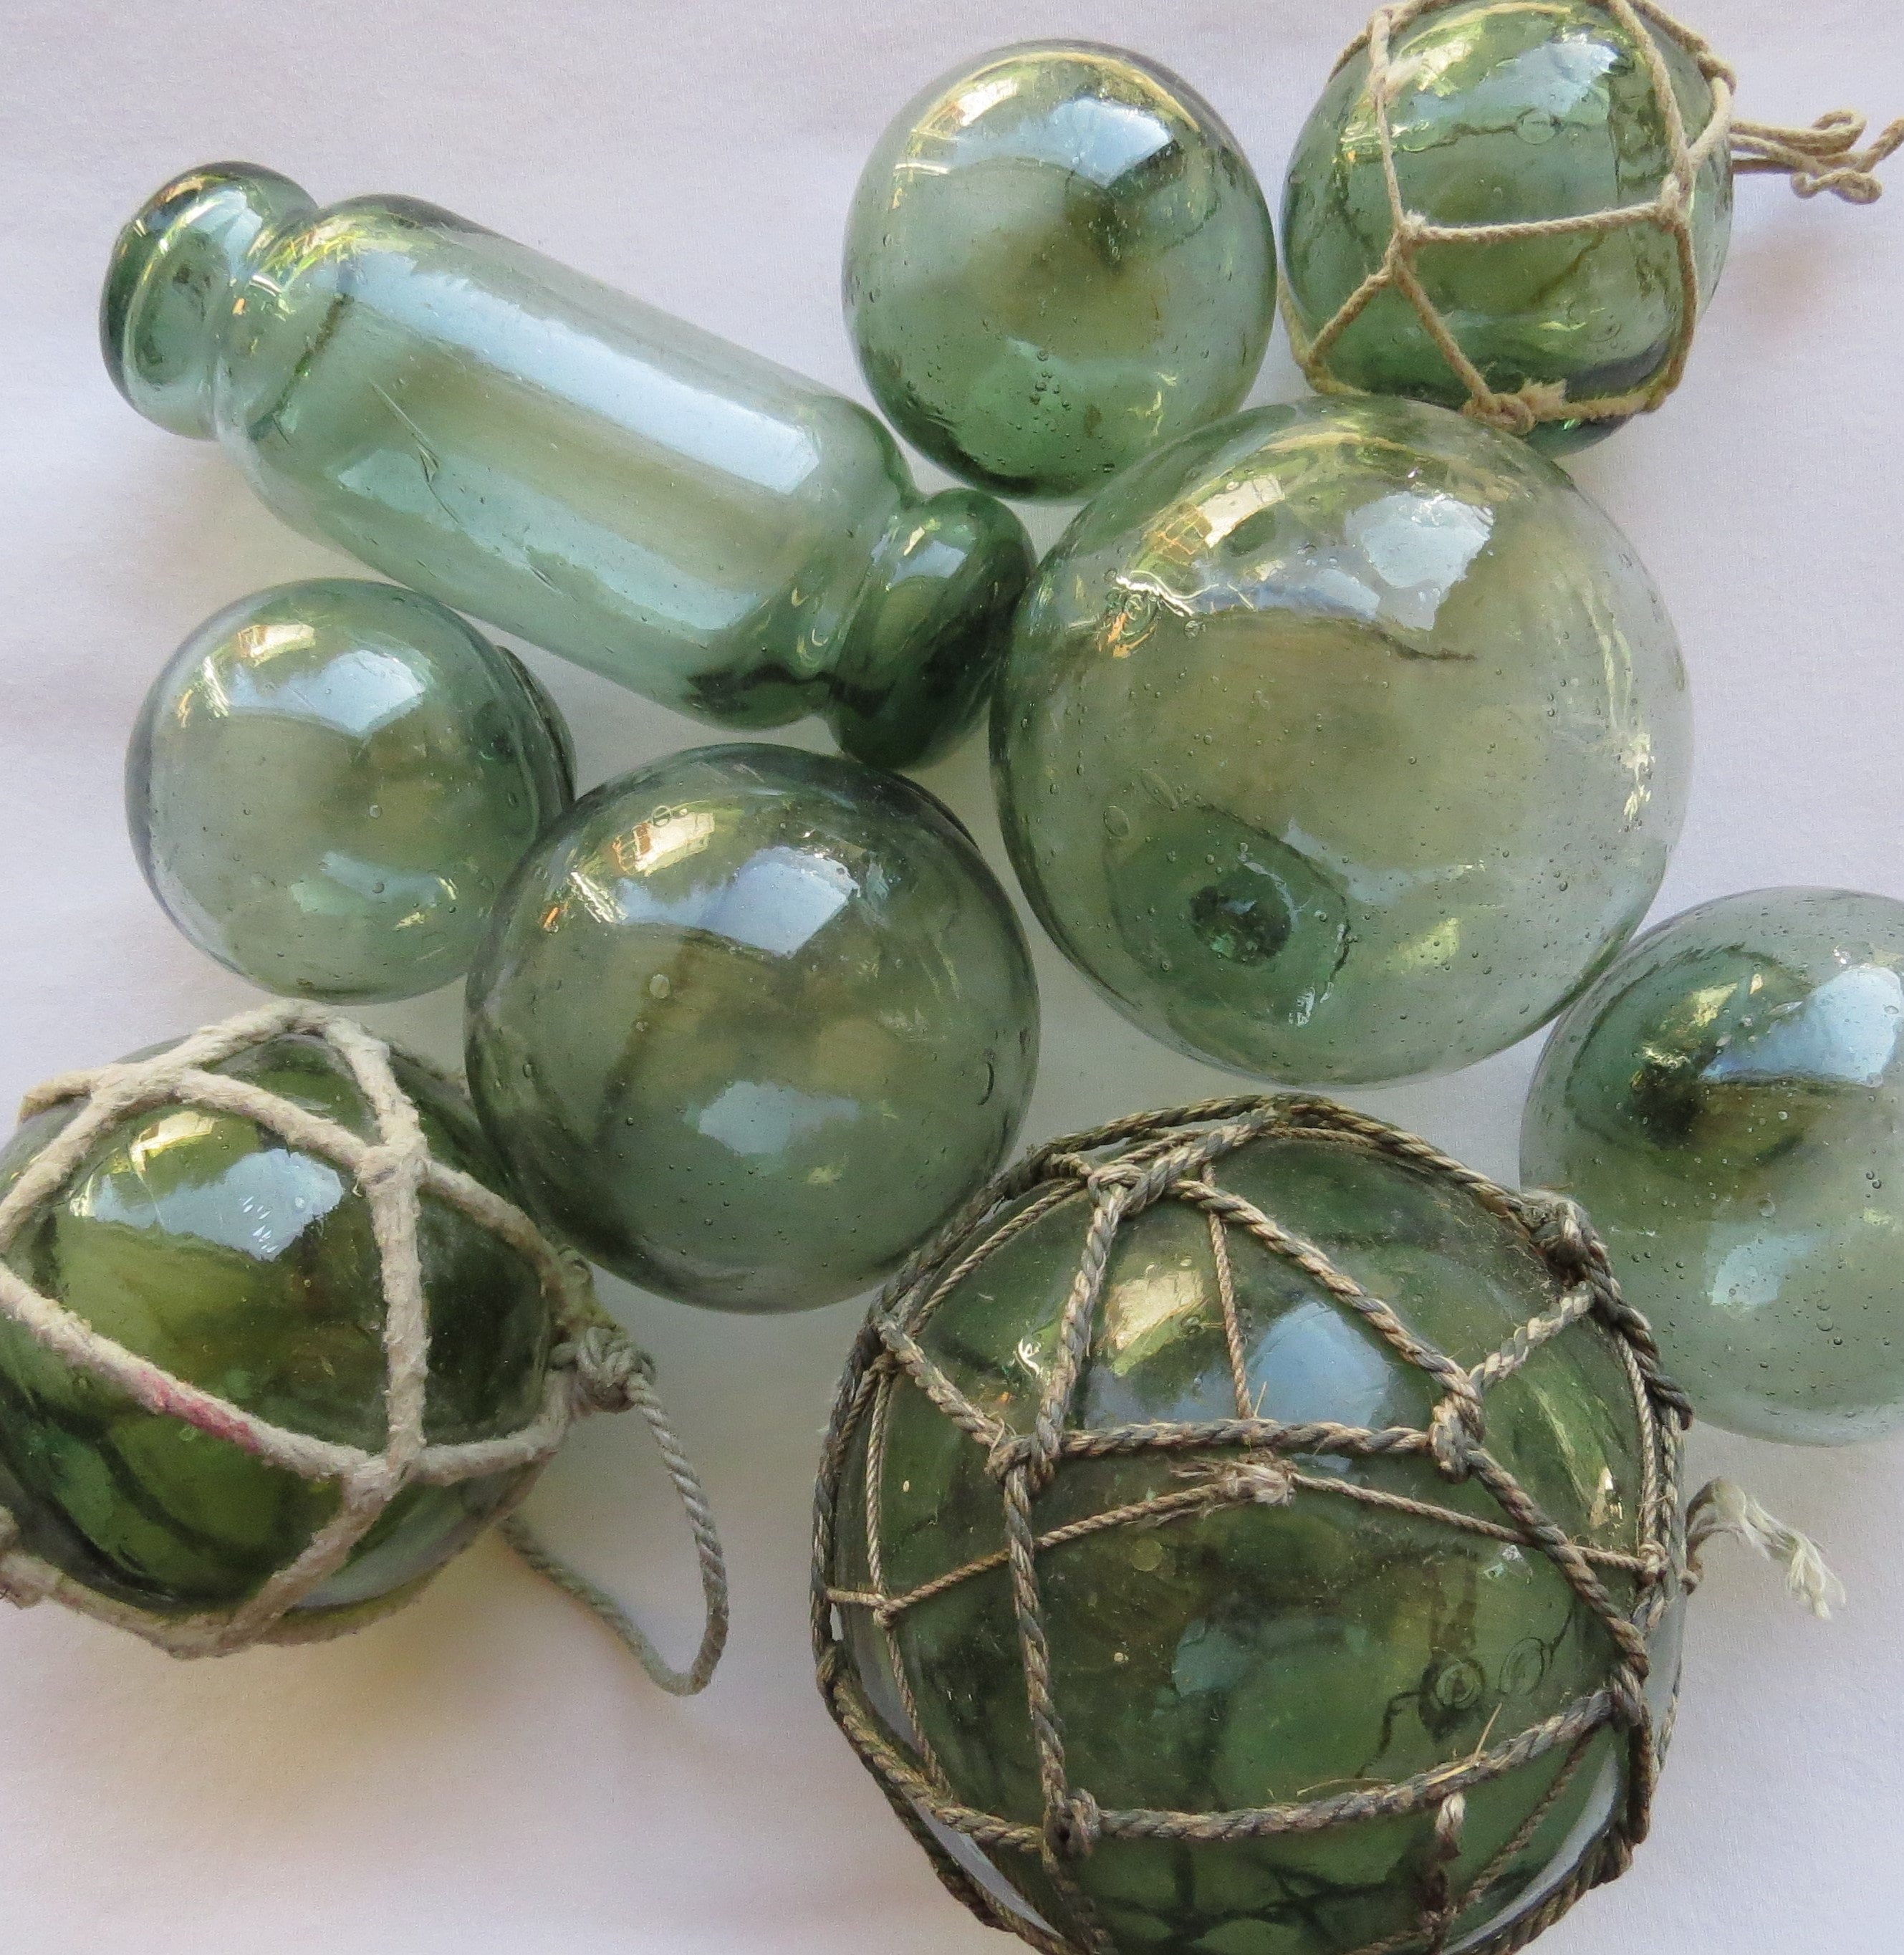 Japanese Glass FLOATS Mixed Sizes Lot of 9 Sea-green Netted